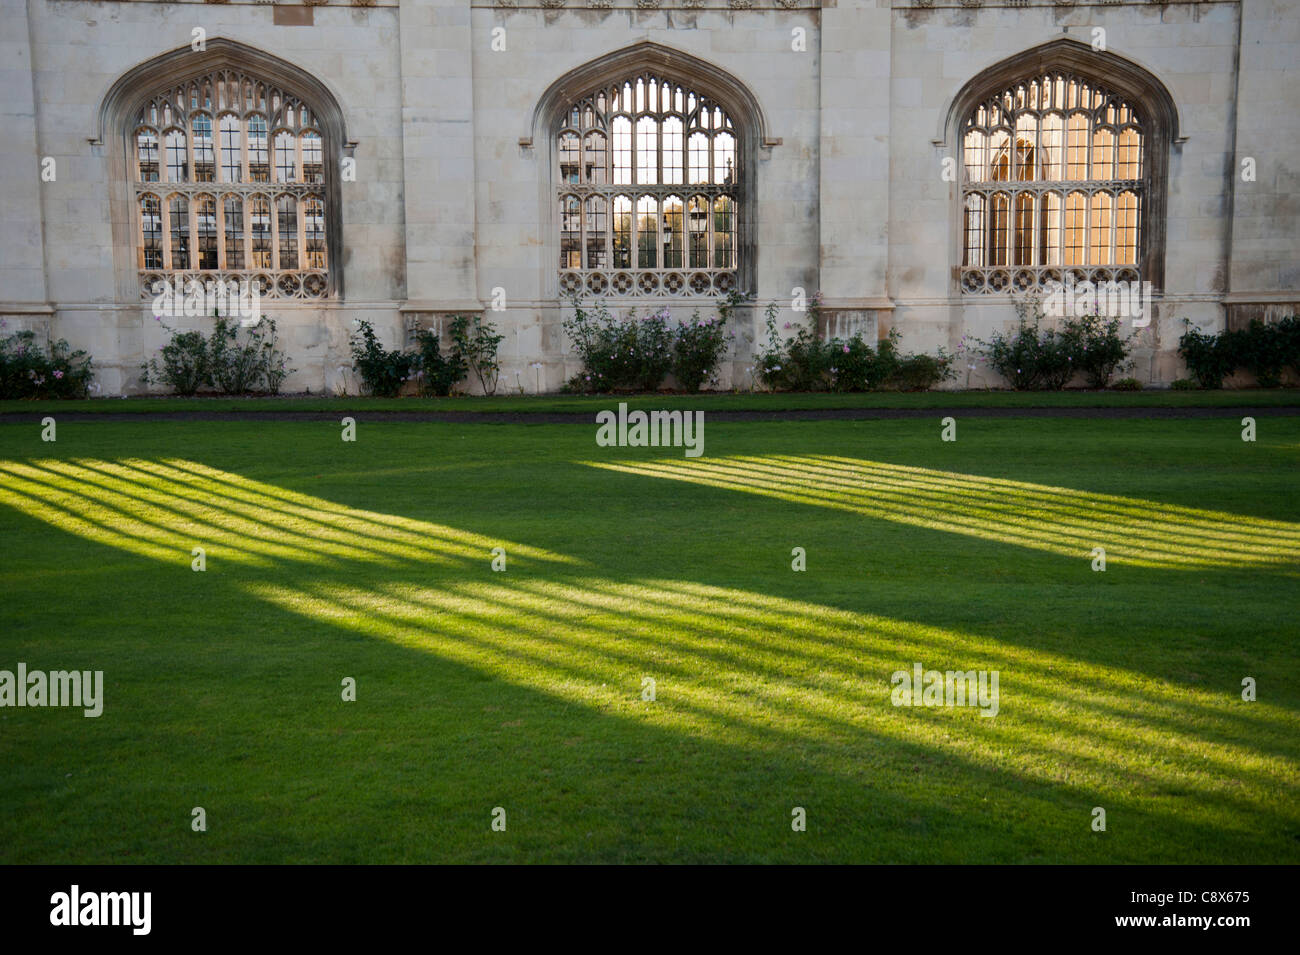 Sunlight and shadows through stone arch windows in a wall at Kings College Cambridge on Kings Parade England UK Stock Photo